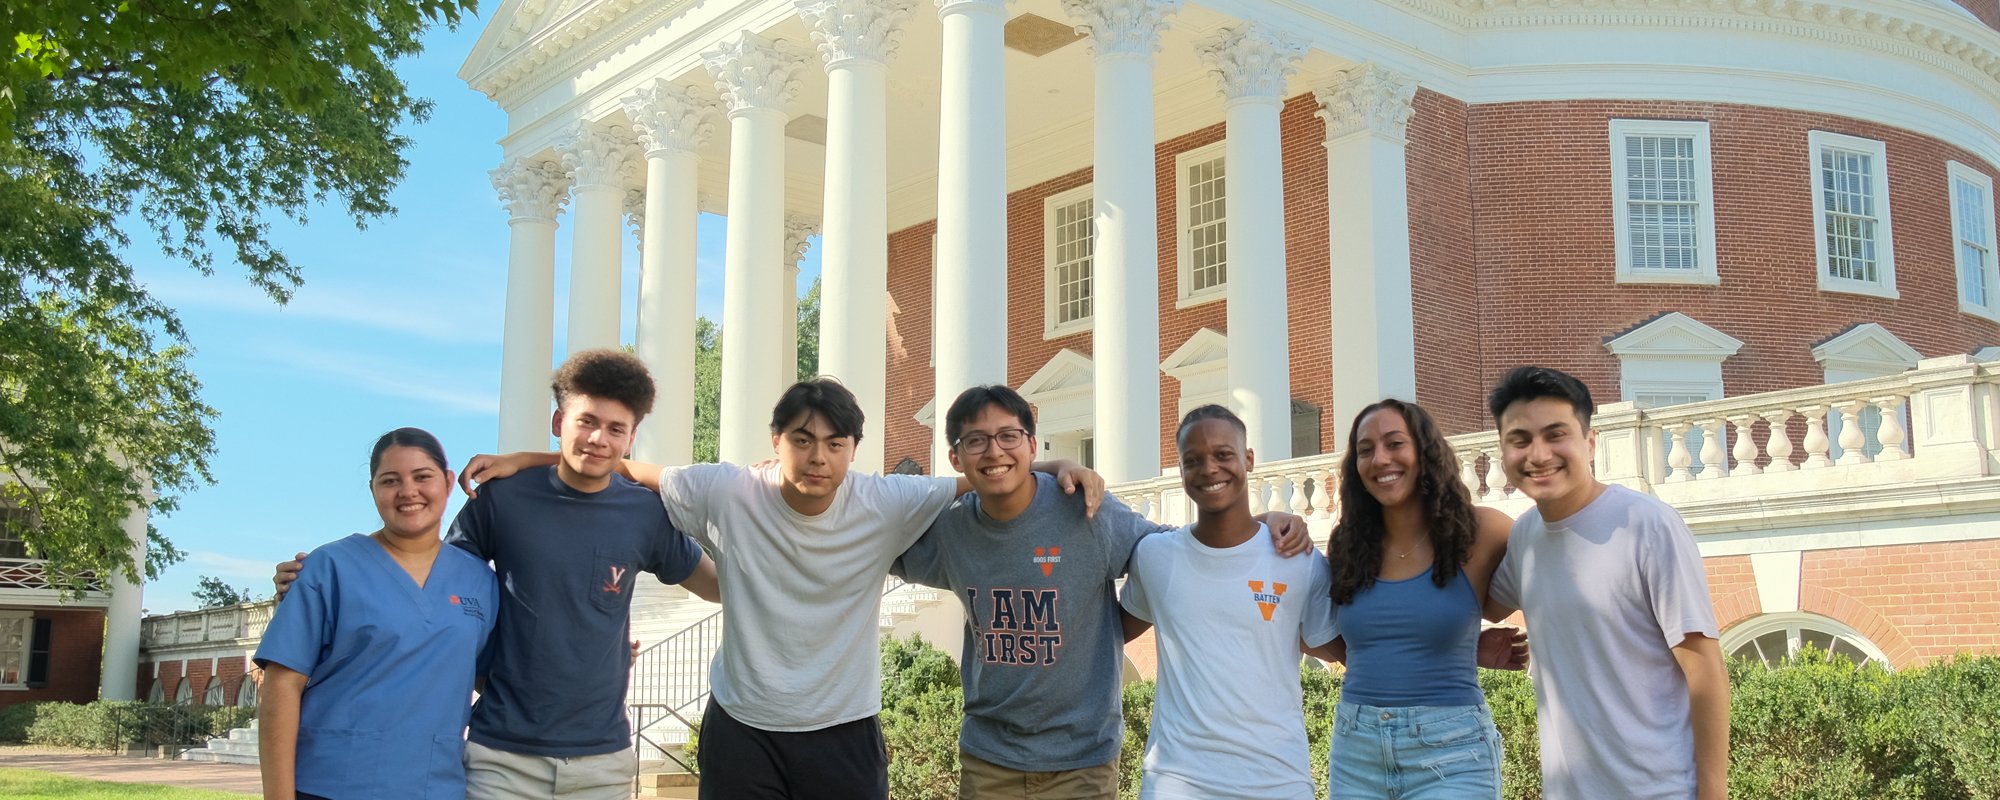 First Generation students in front of the Rotunda at UVA